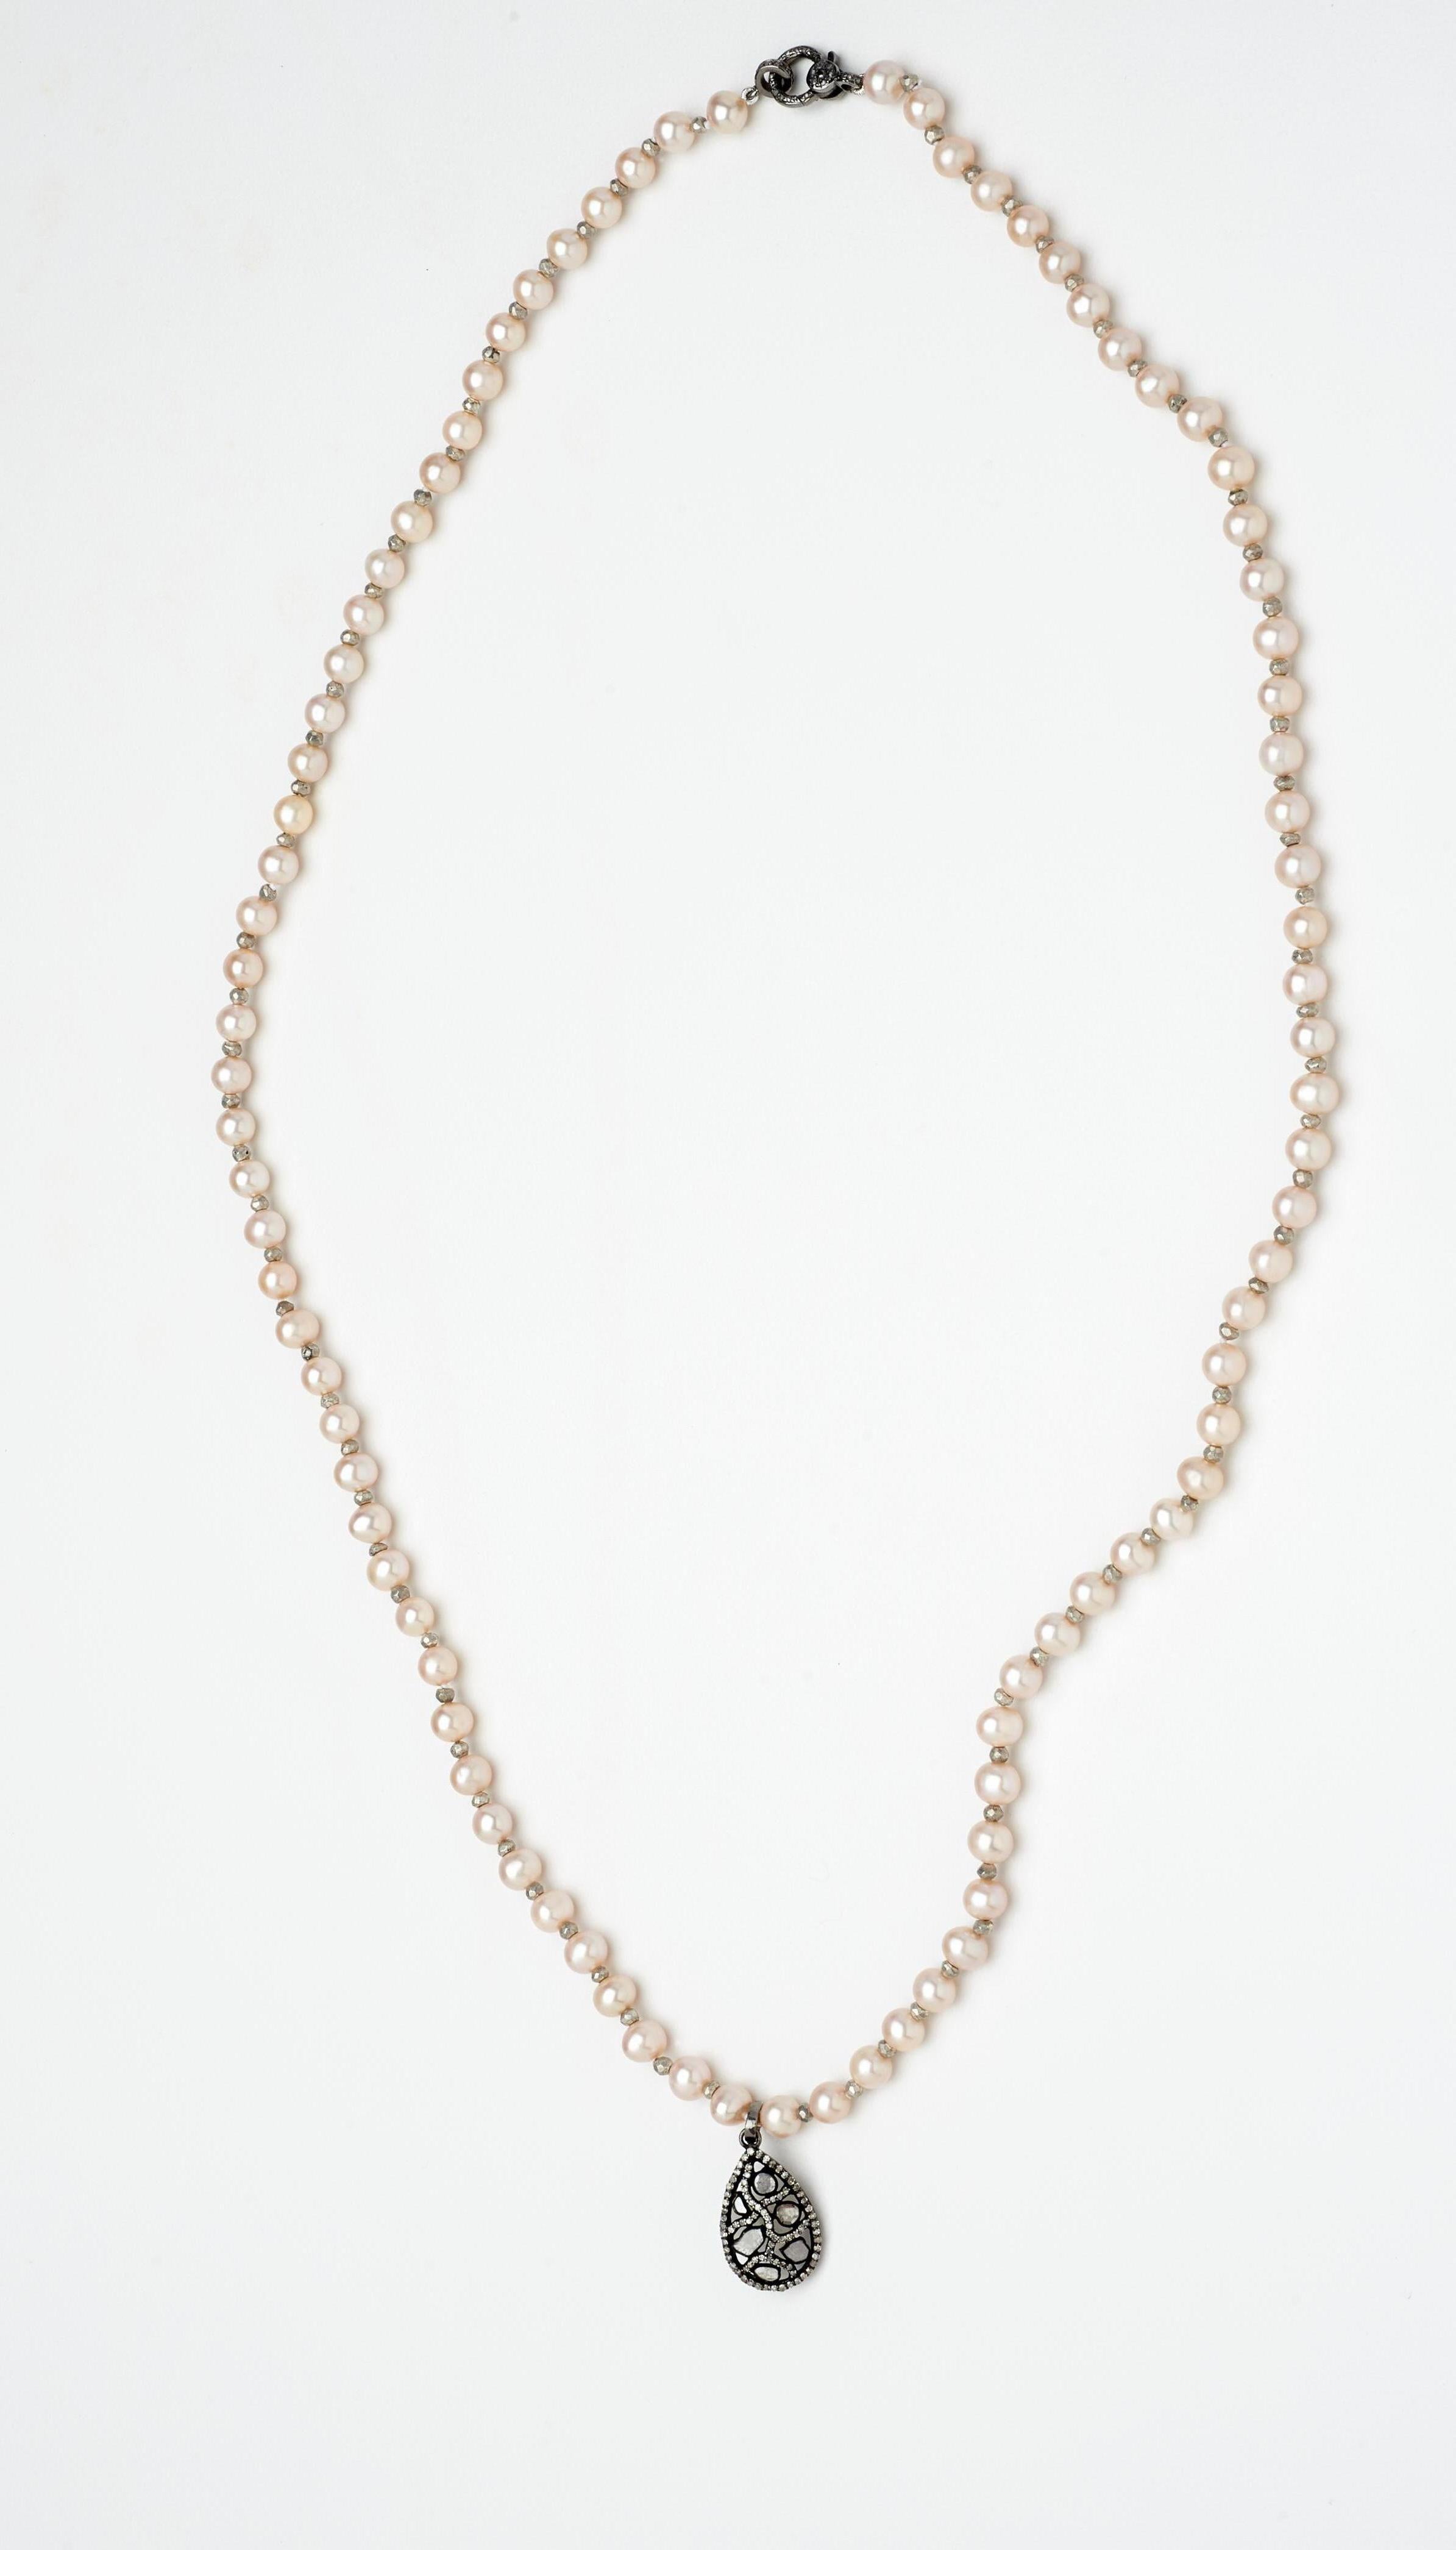 Artisan Blush Akoya Pearl Necklace with Teardrop Diamond Sterling Silver Pendant For Sale